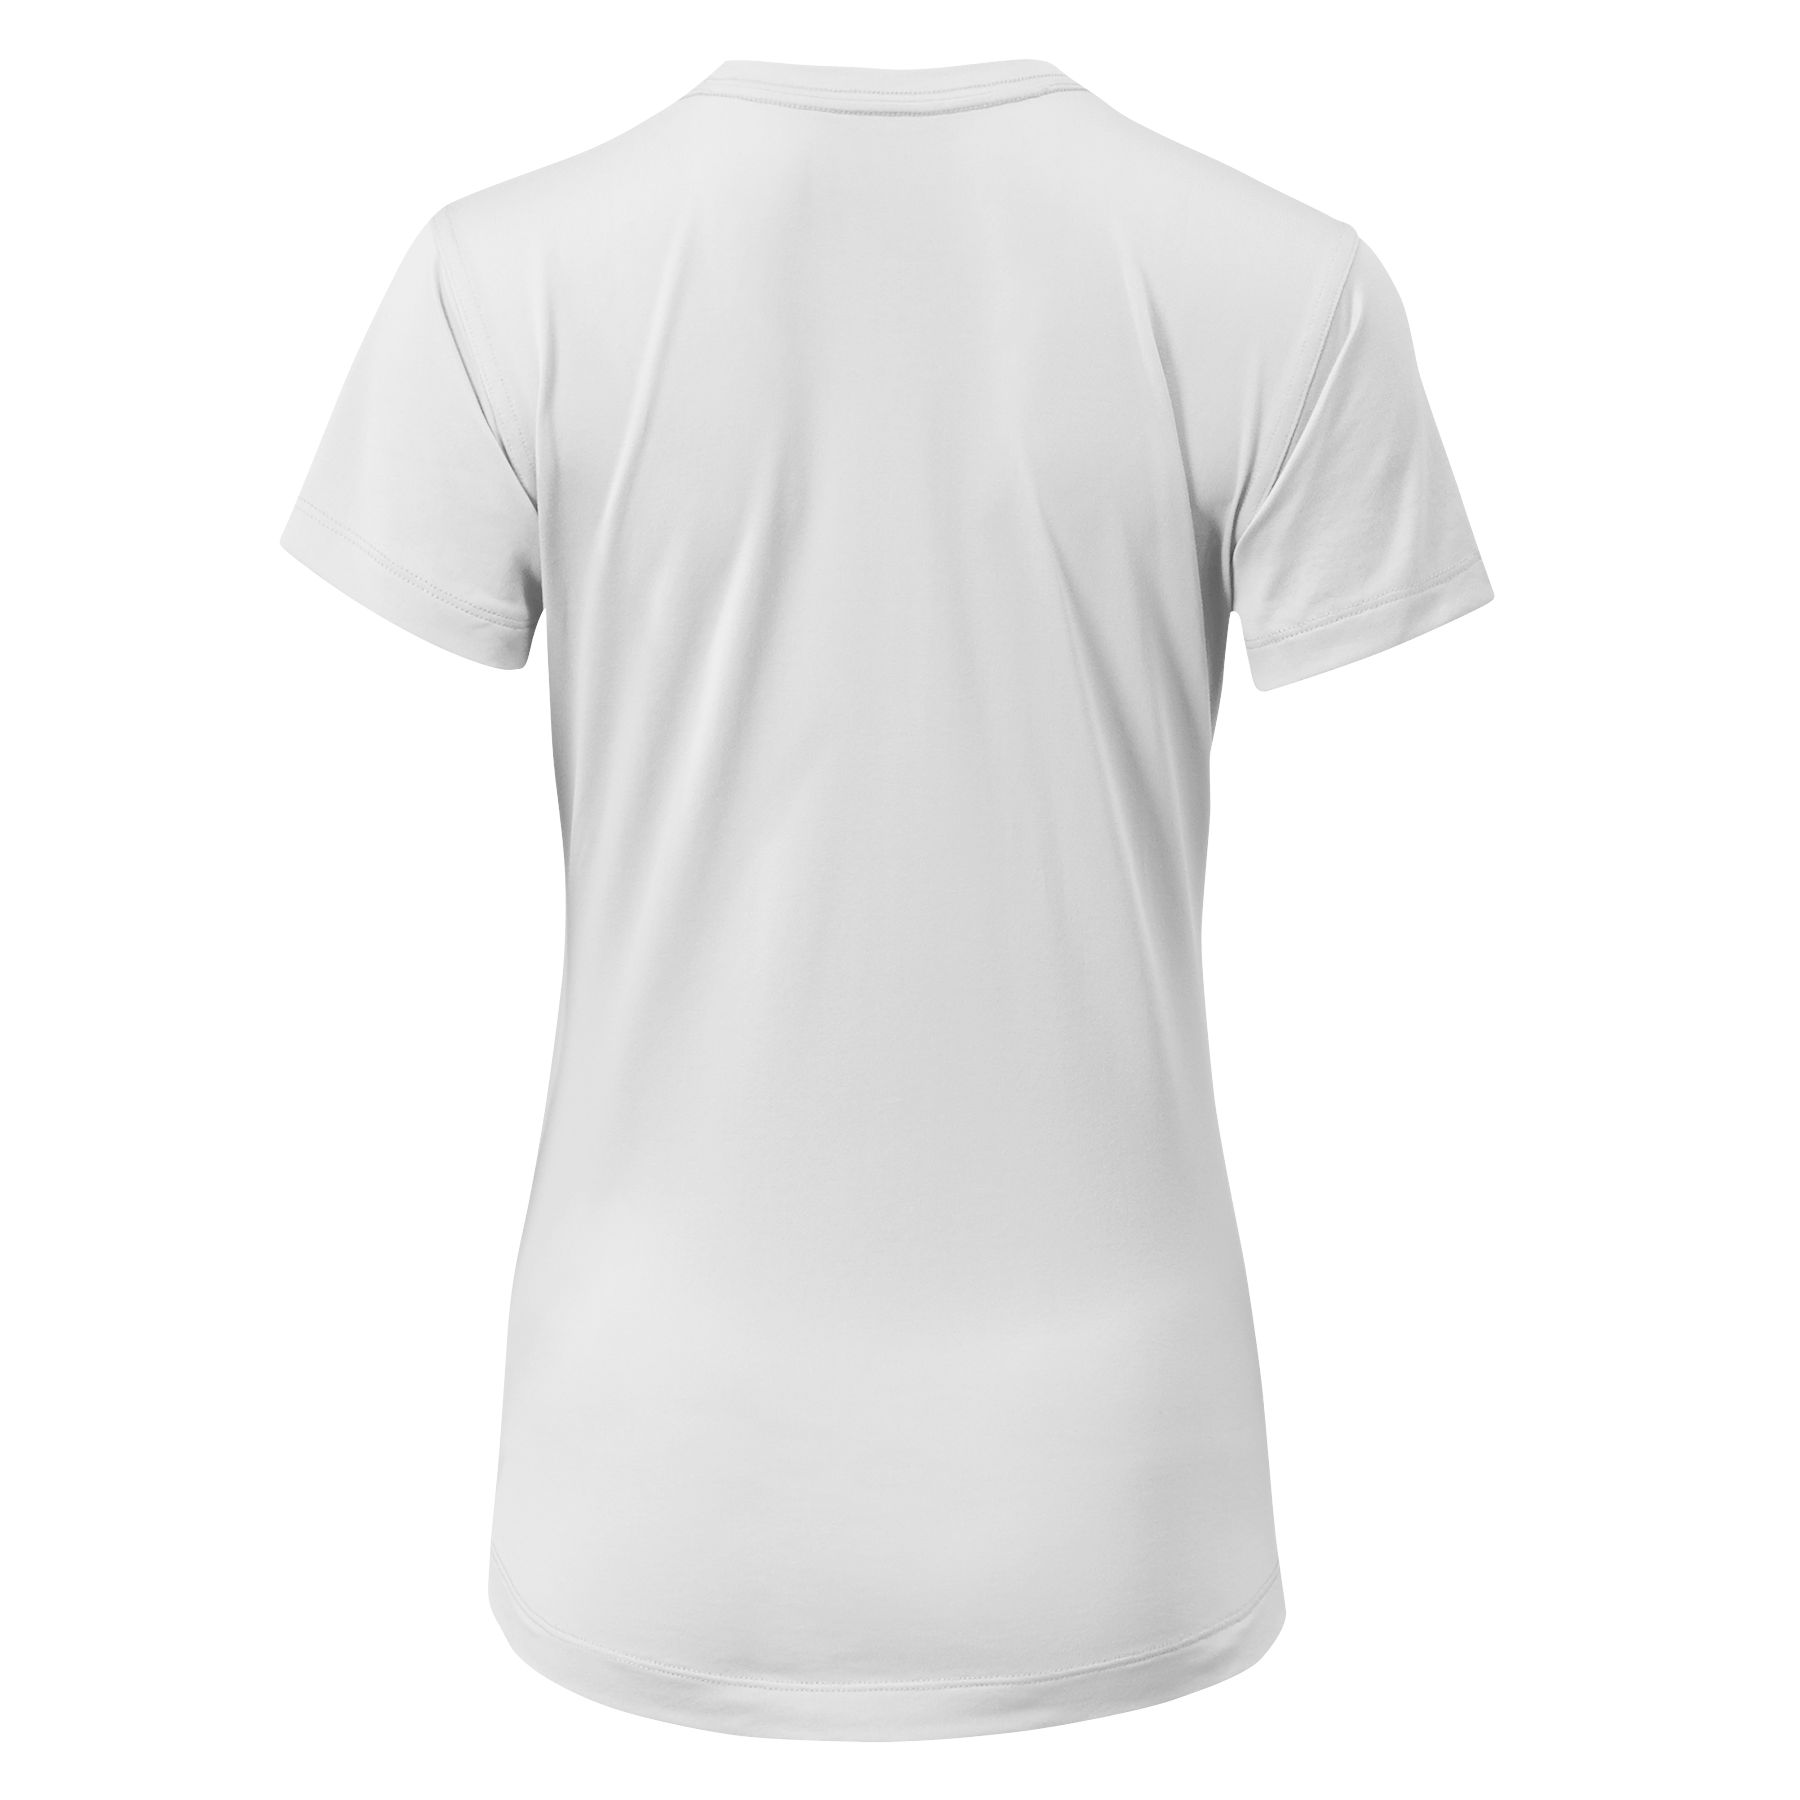 NB Women's SS Tech Tee, White image number 2